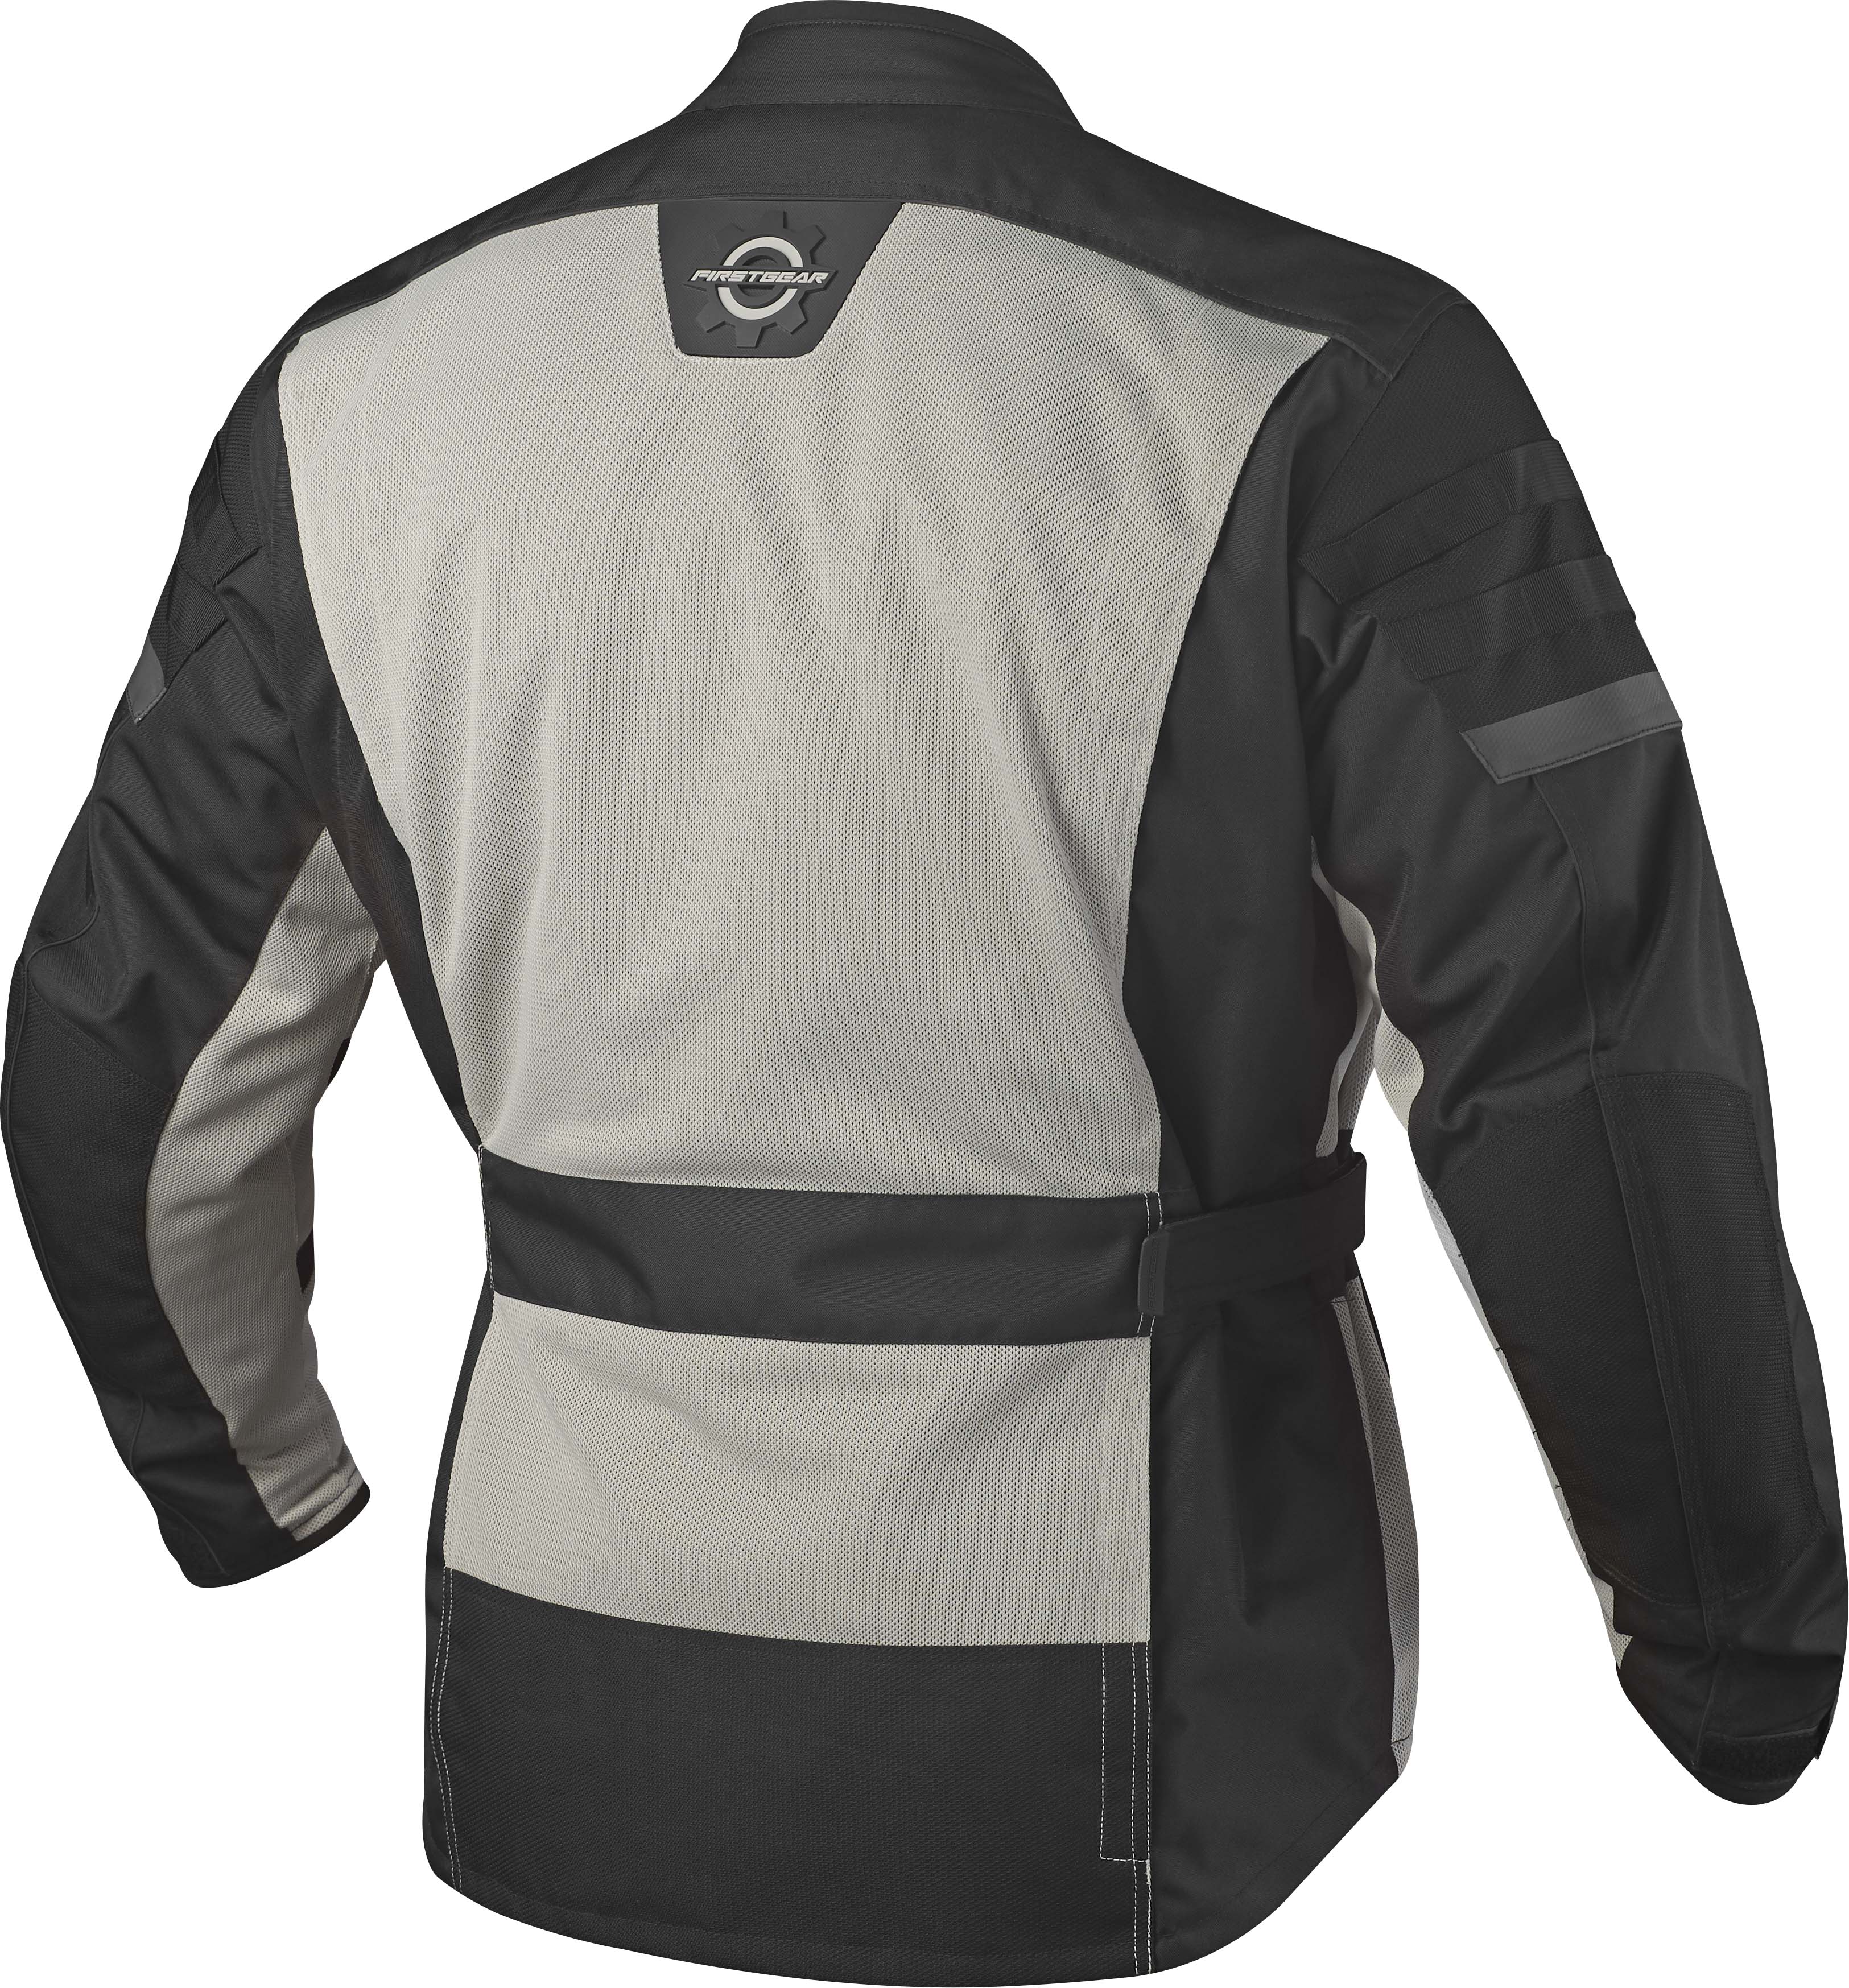 ADV AIR MESH JACKET Jackets Premium Motorcycle Clothing & Gear For